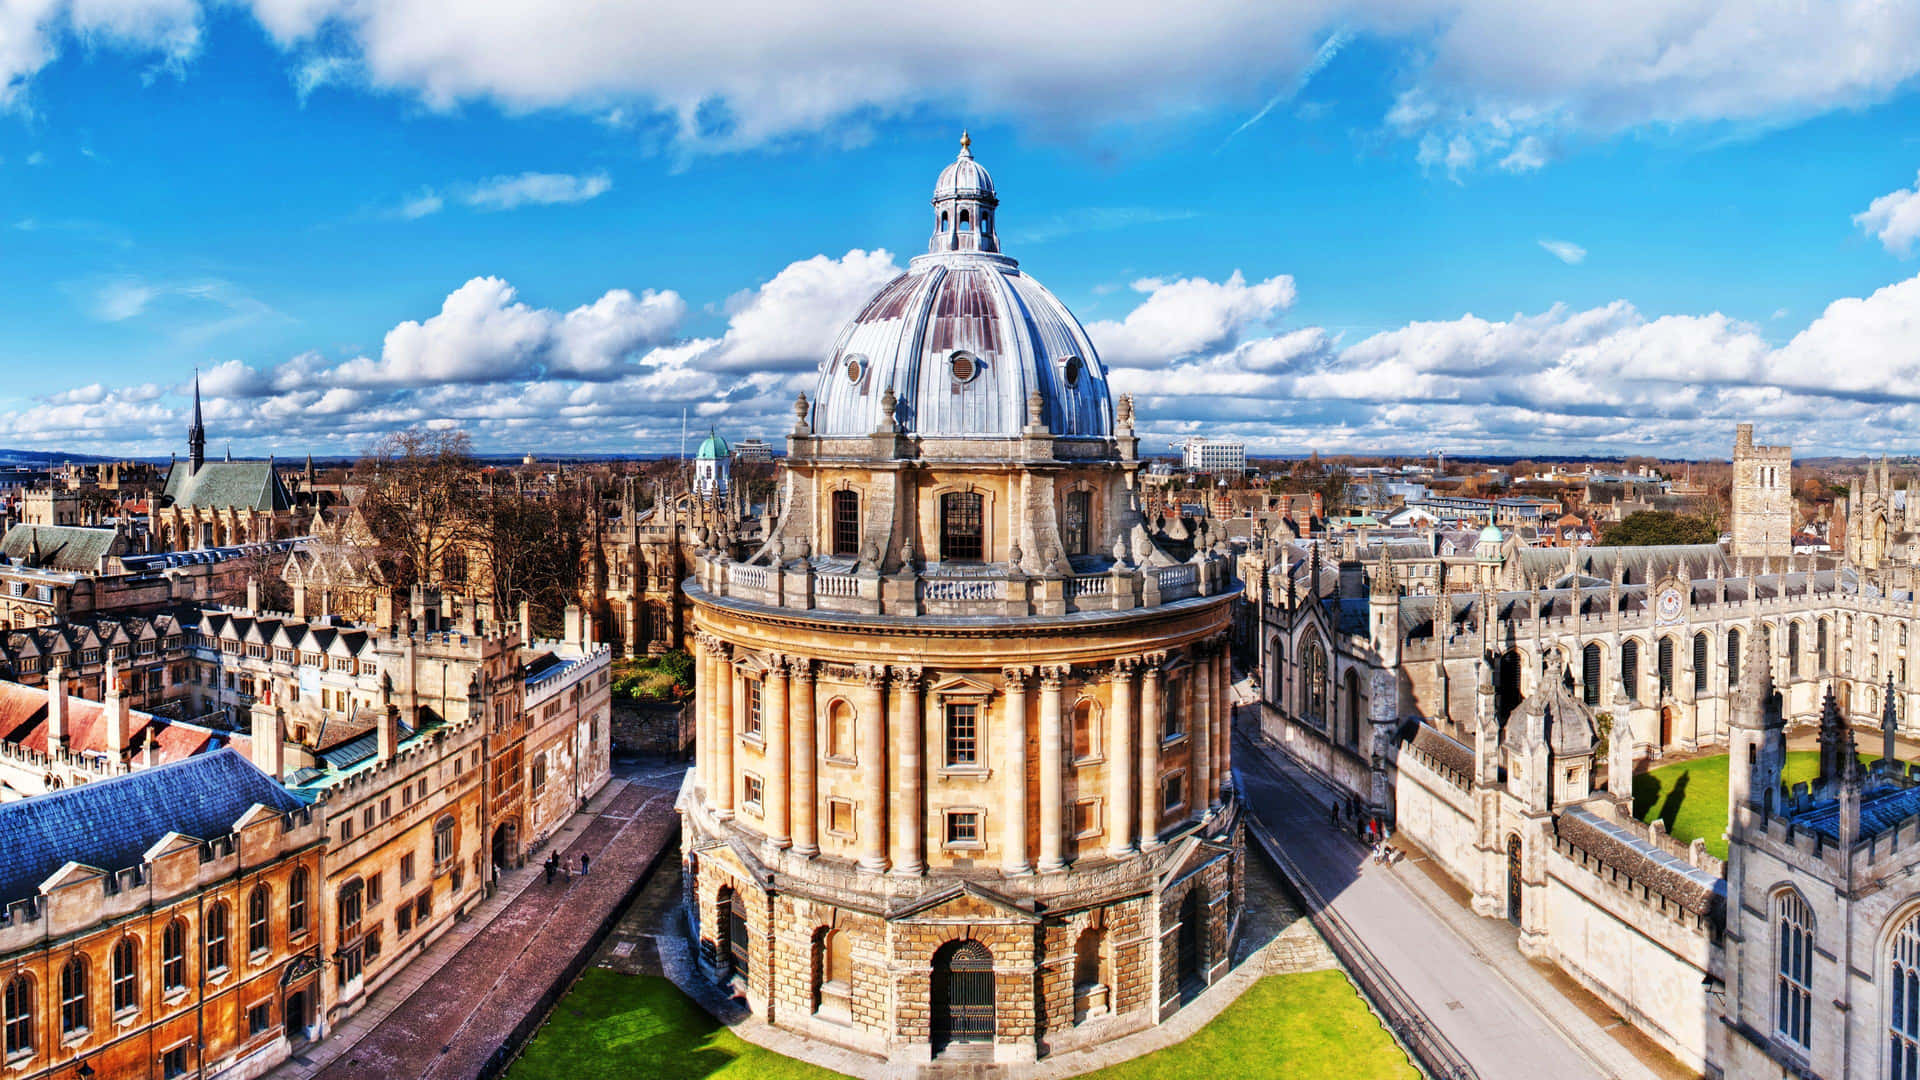 A Sunny Day at Oxford University with Radcliffe Camera in View Wallpaper